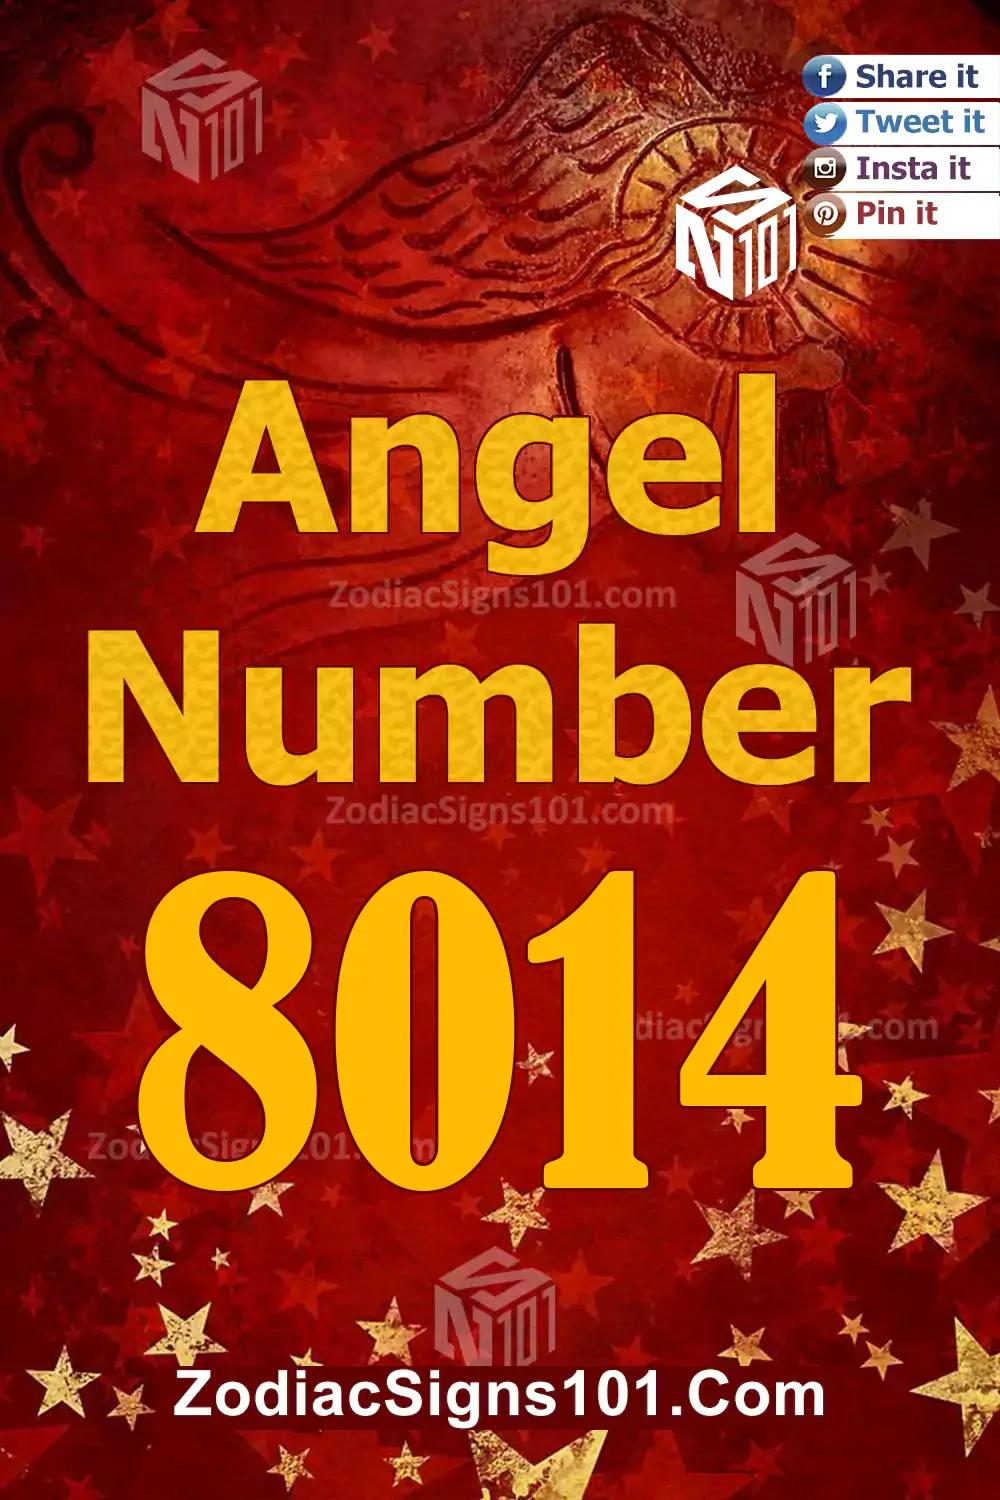 8014 Angel Number Meaning